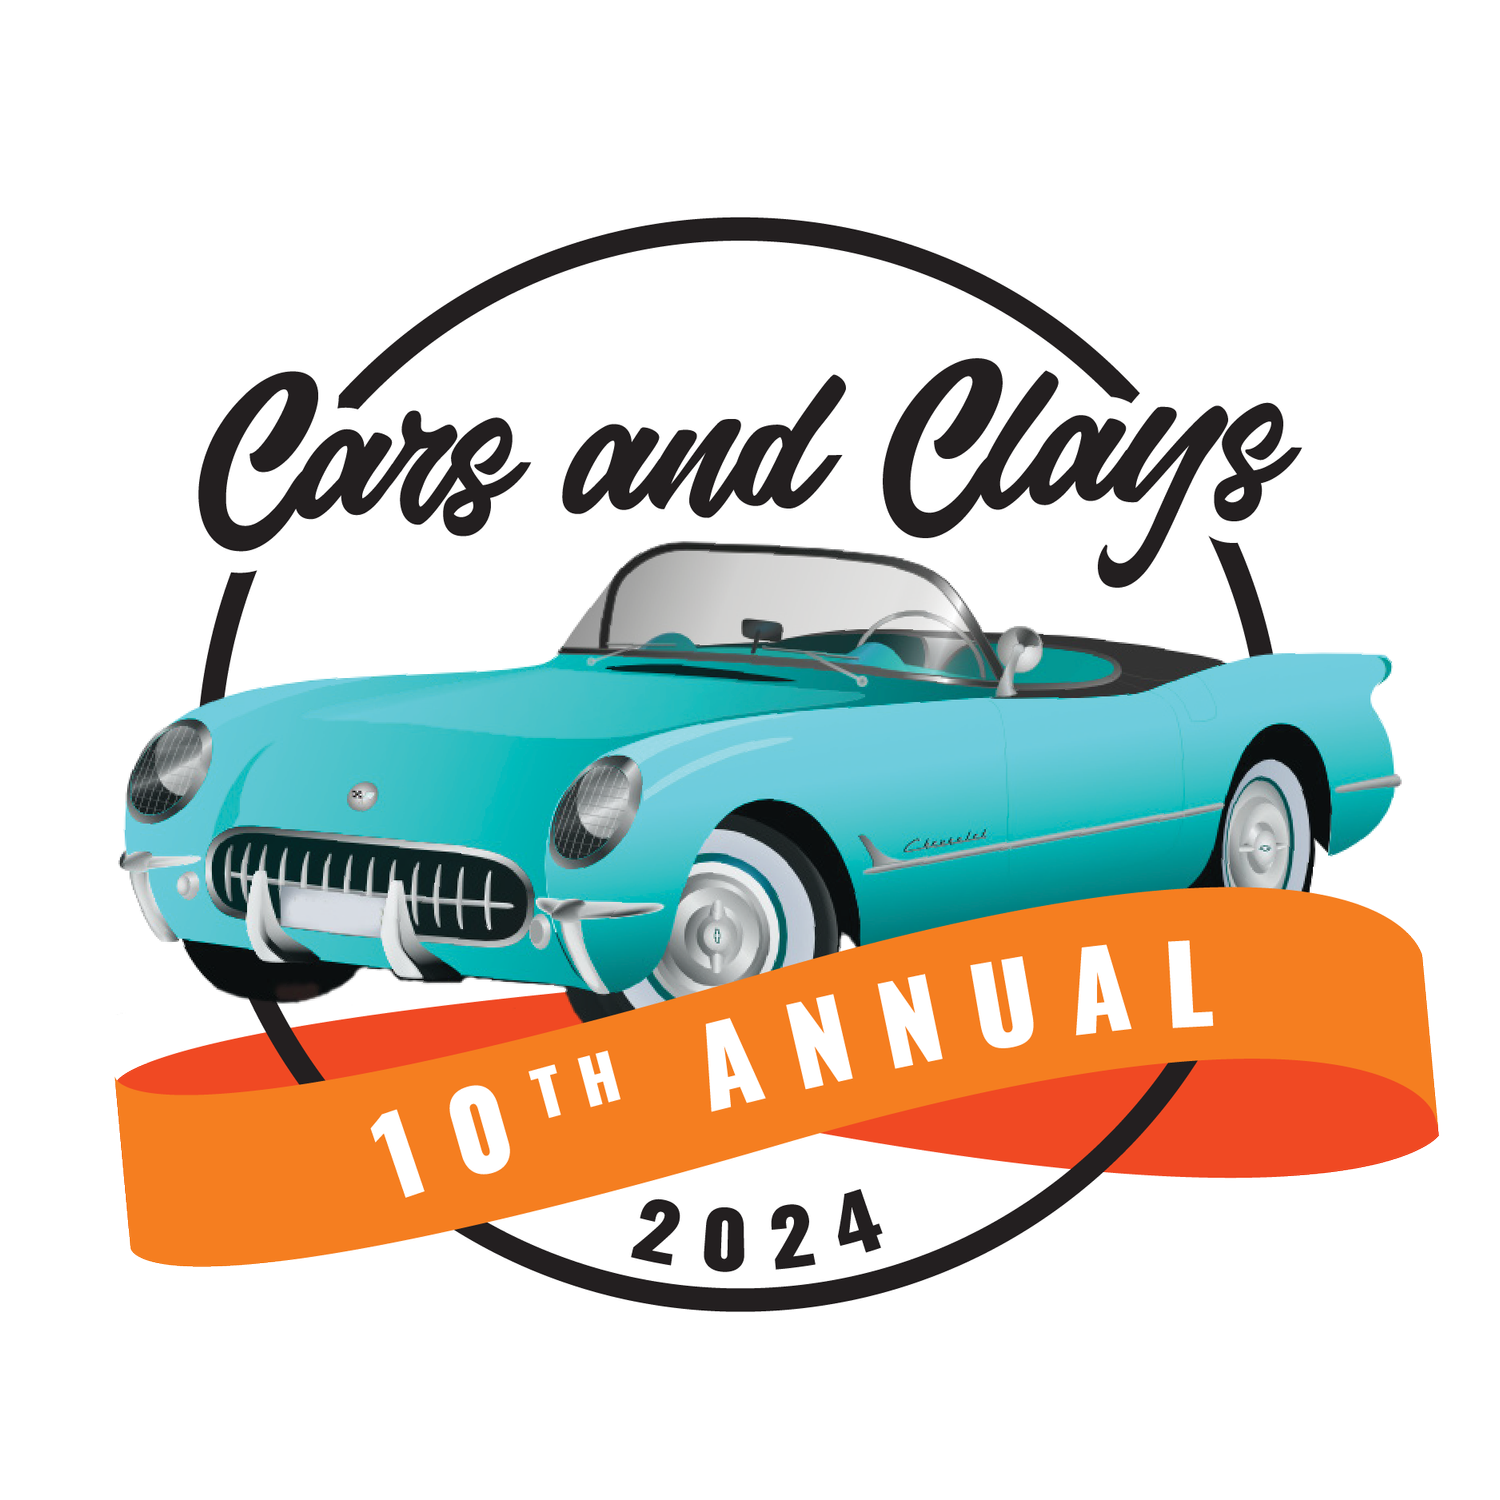 Cars and Clays 10th Annual